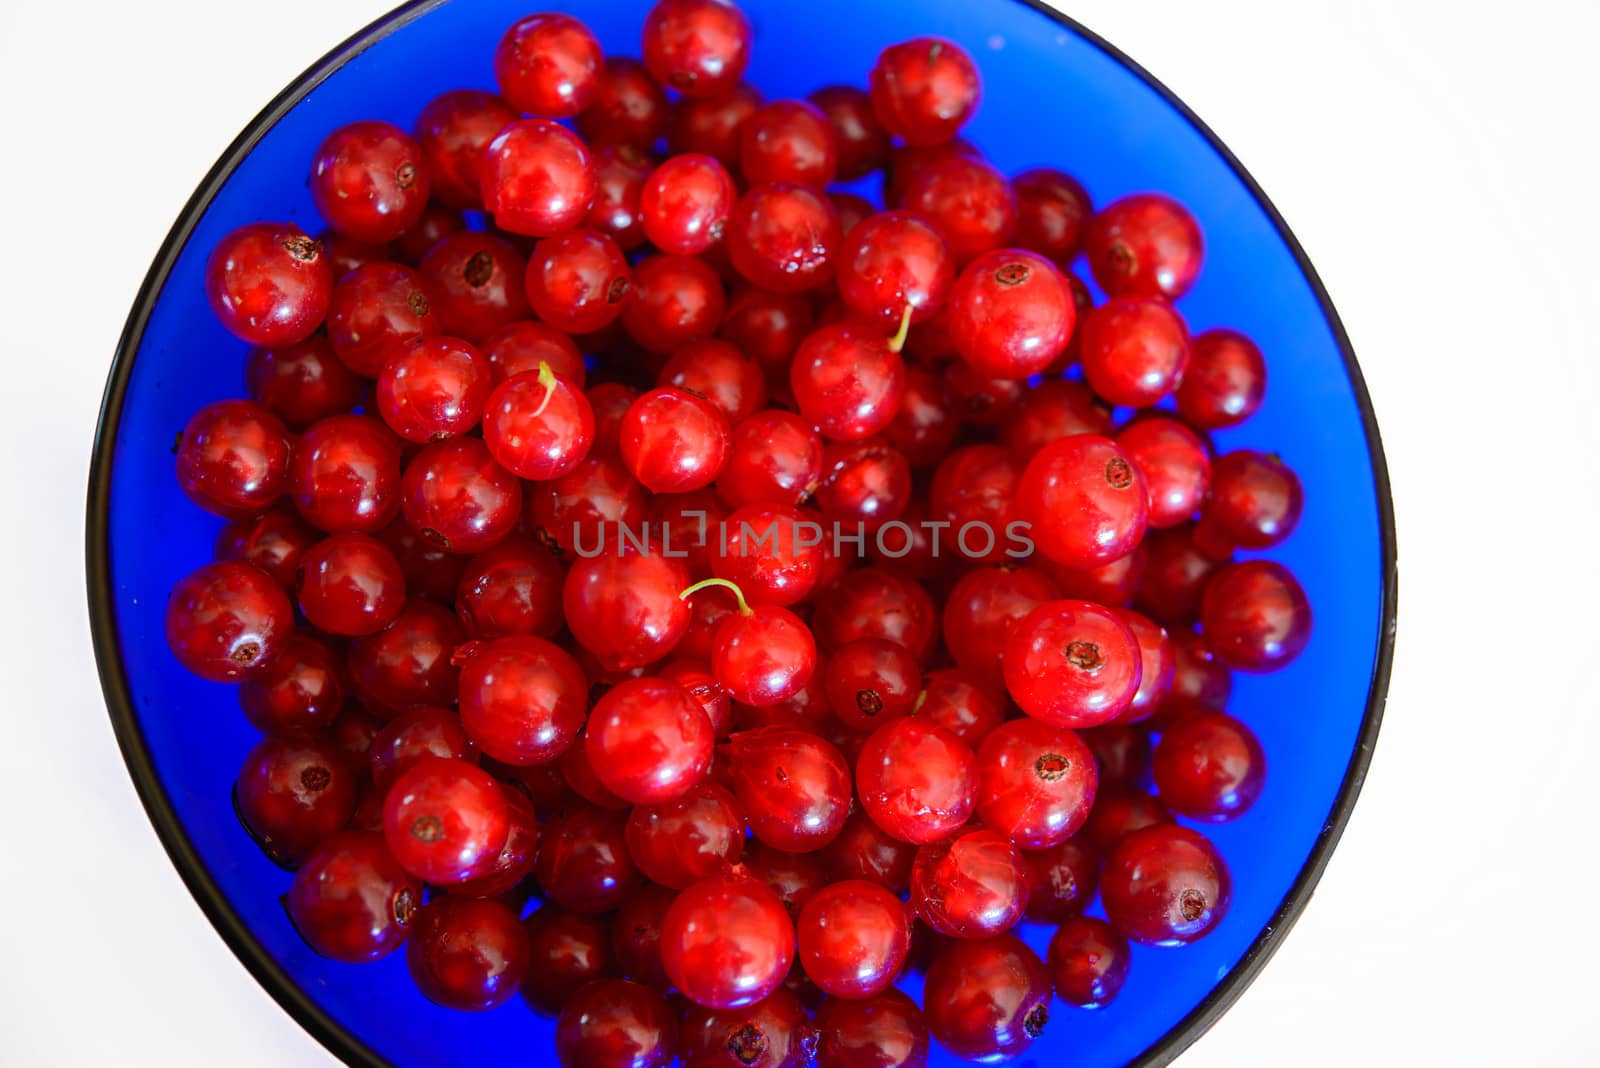 Red currants in a blue bowl witha white background